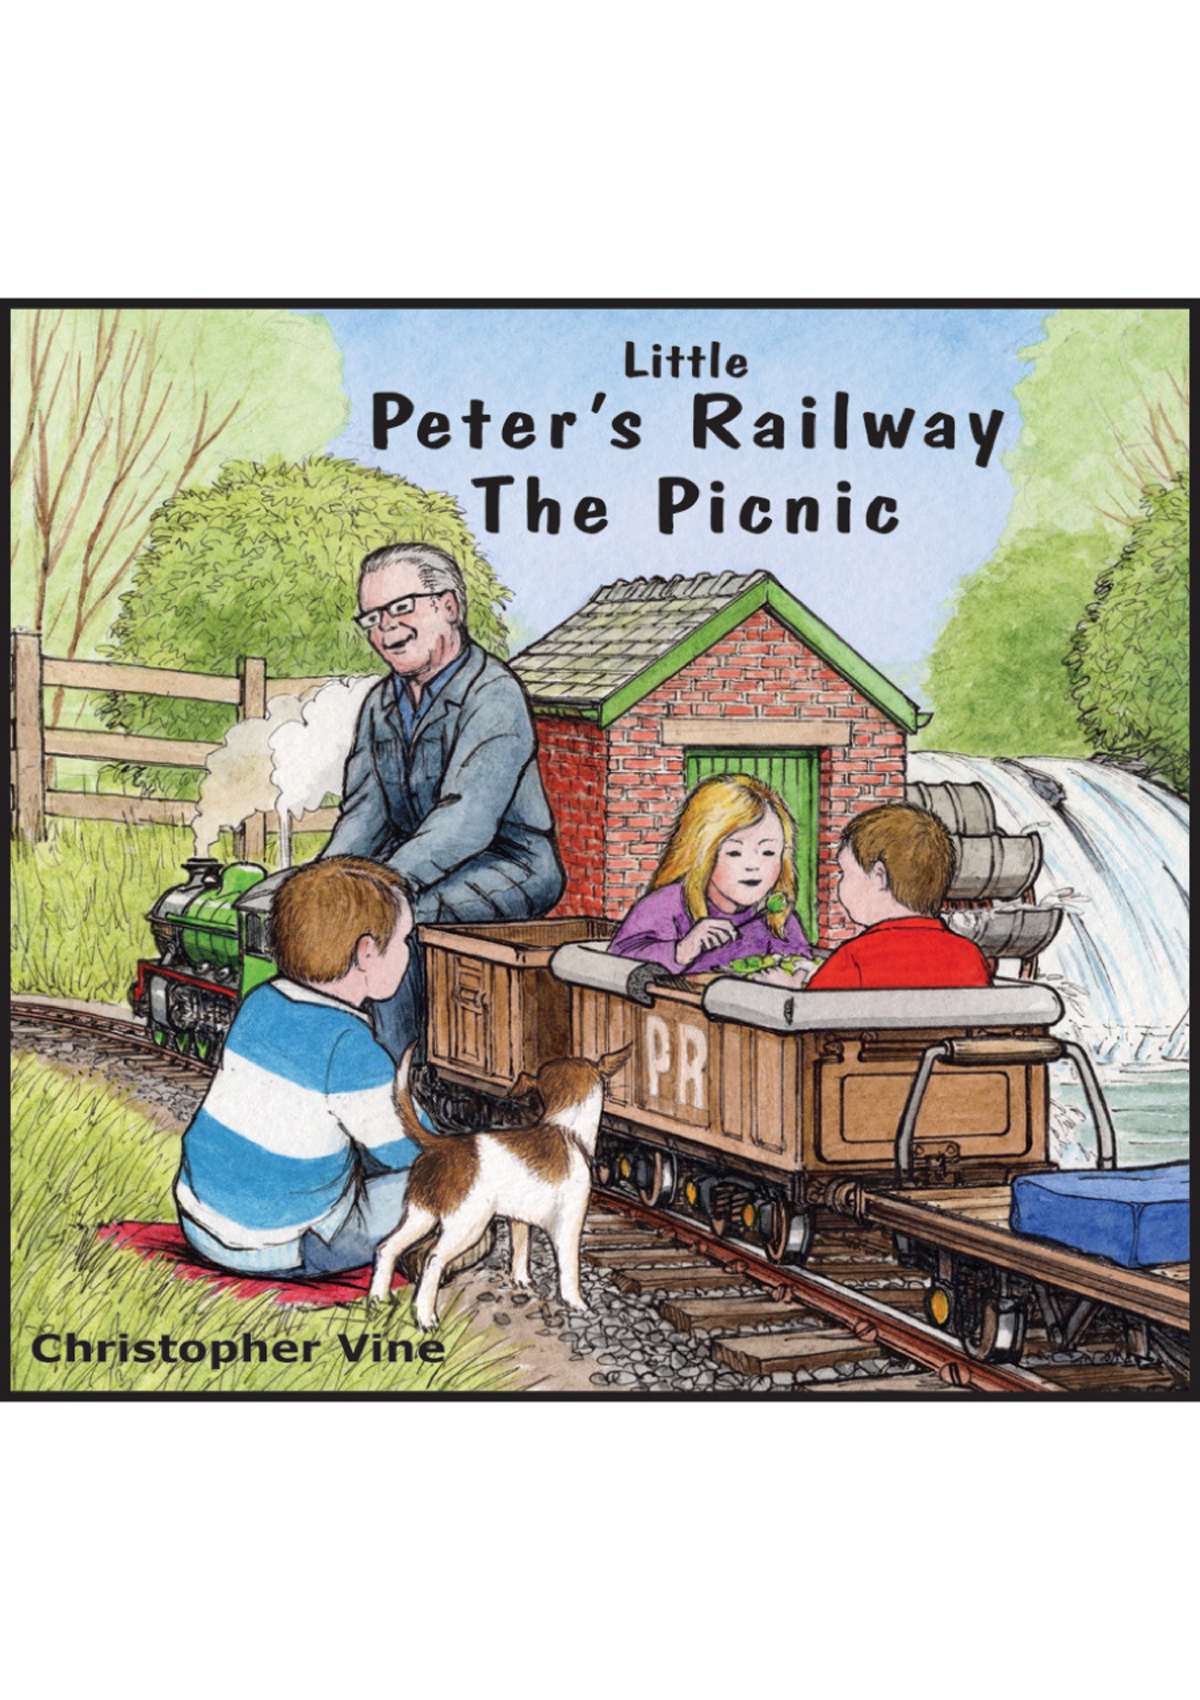 Book - Little Peter's Railway - The Picnic